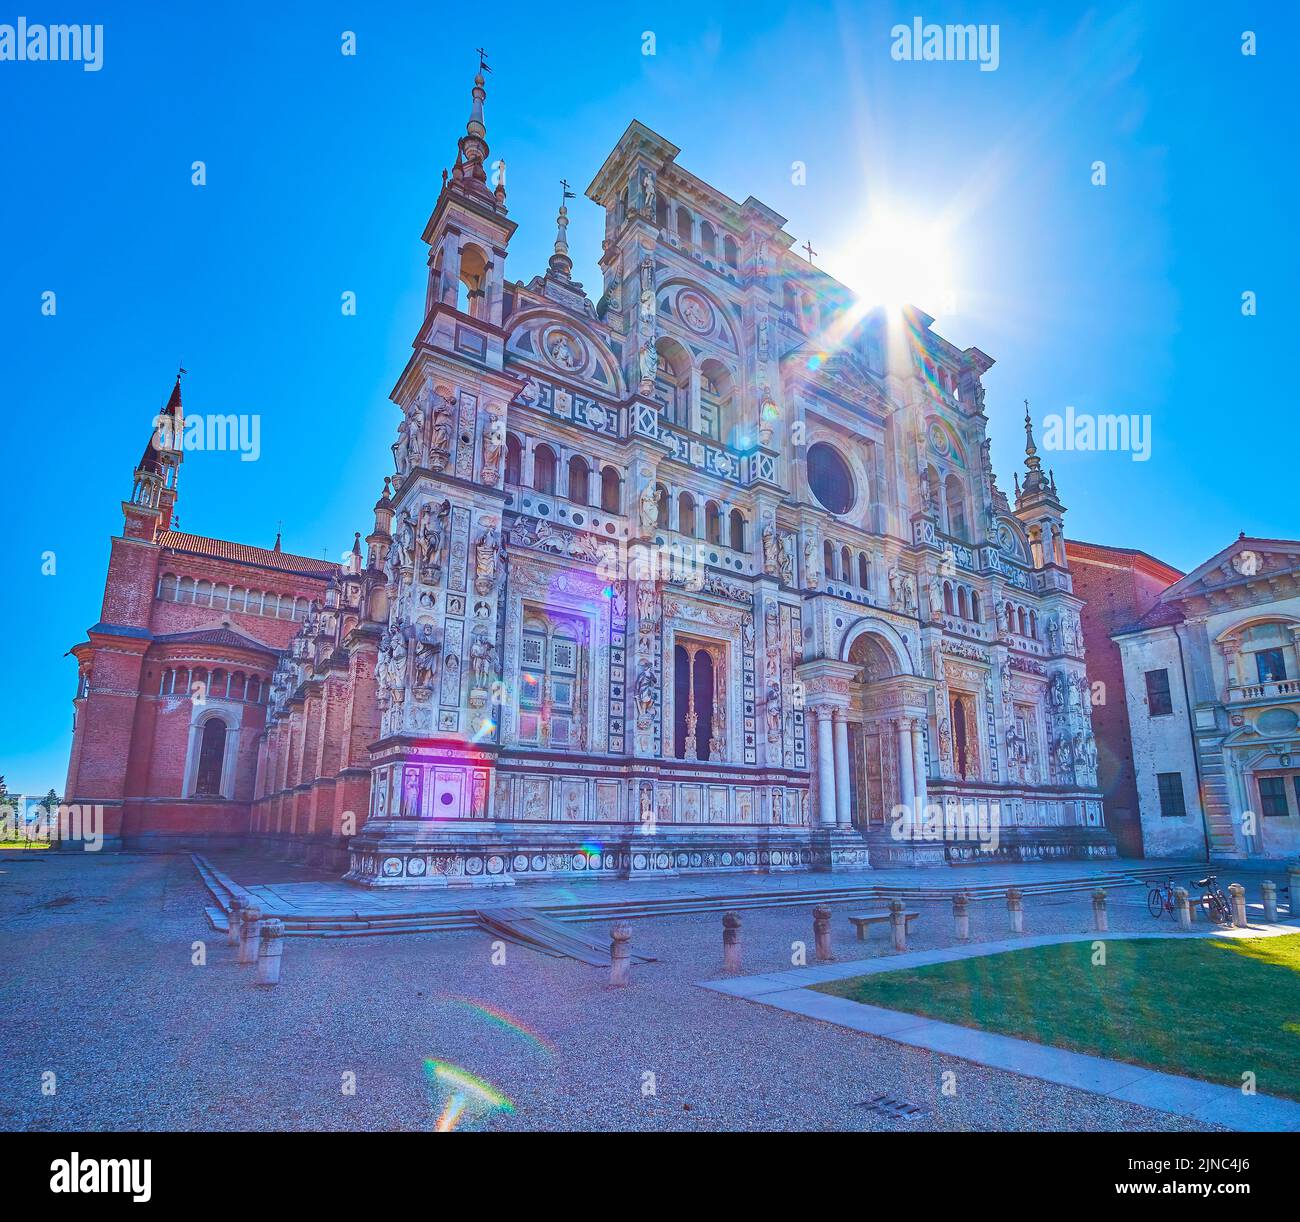 The marble facade with colorful carved decorations of Cathedral of Certosa di Pavia monastery, Italy Stock Photo